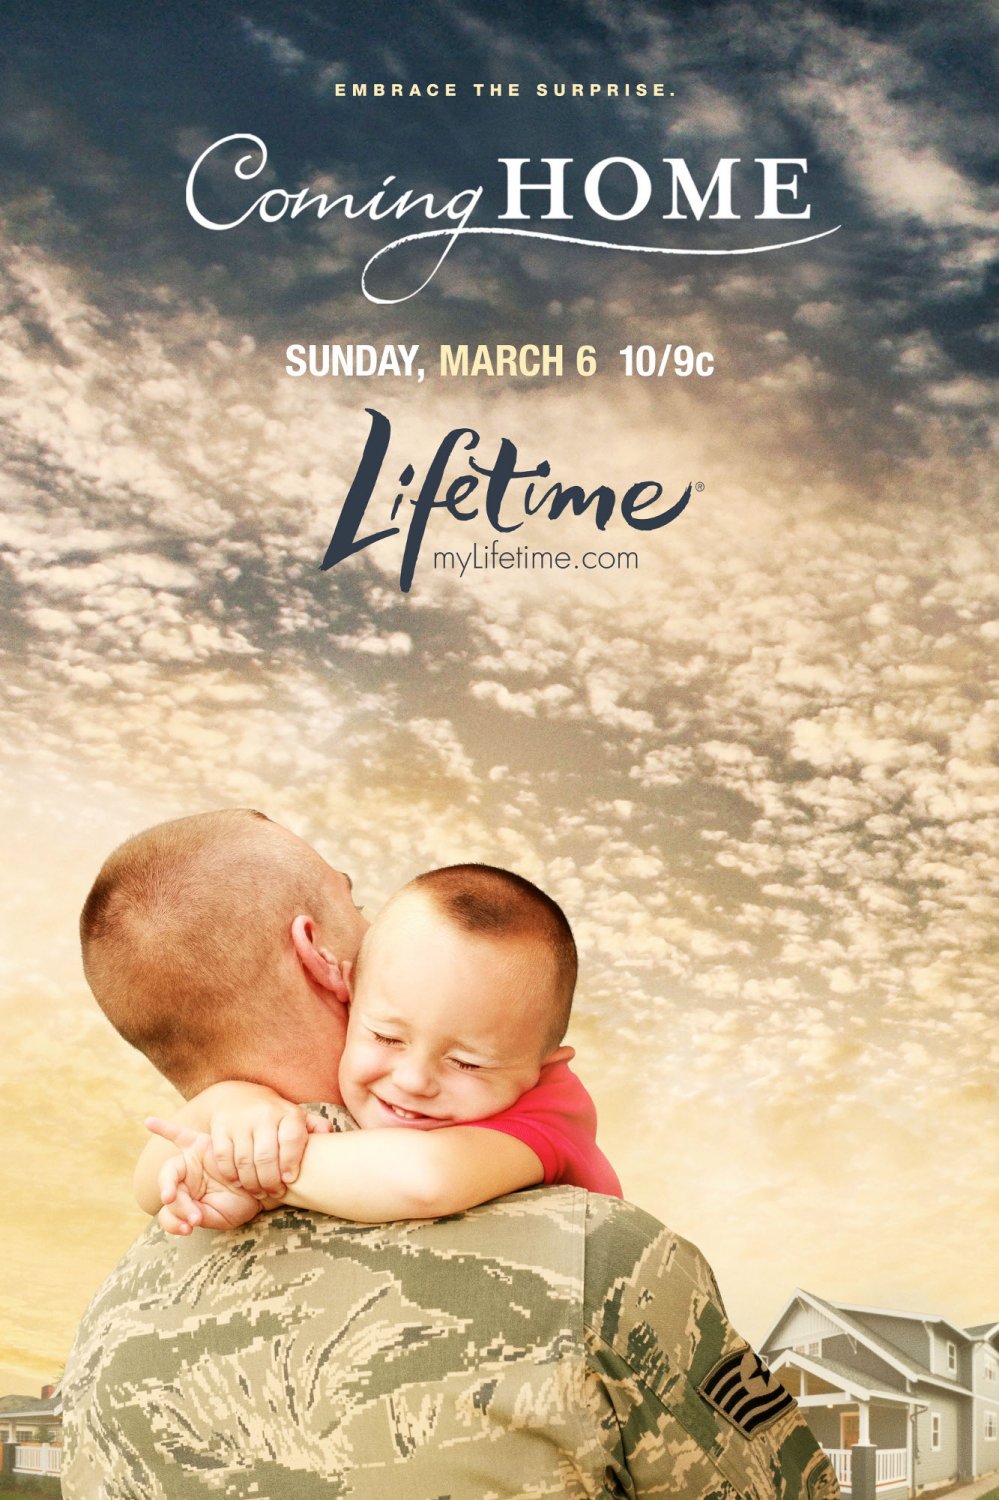 Extra Large TV Poster Image for Coming Home 